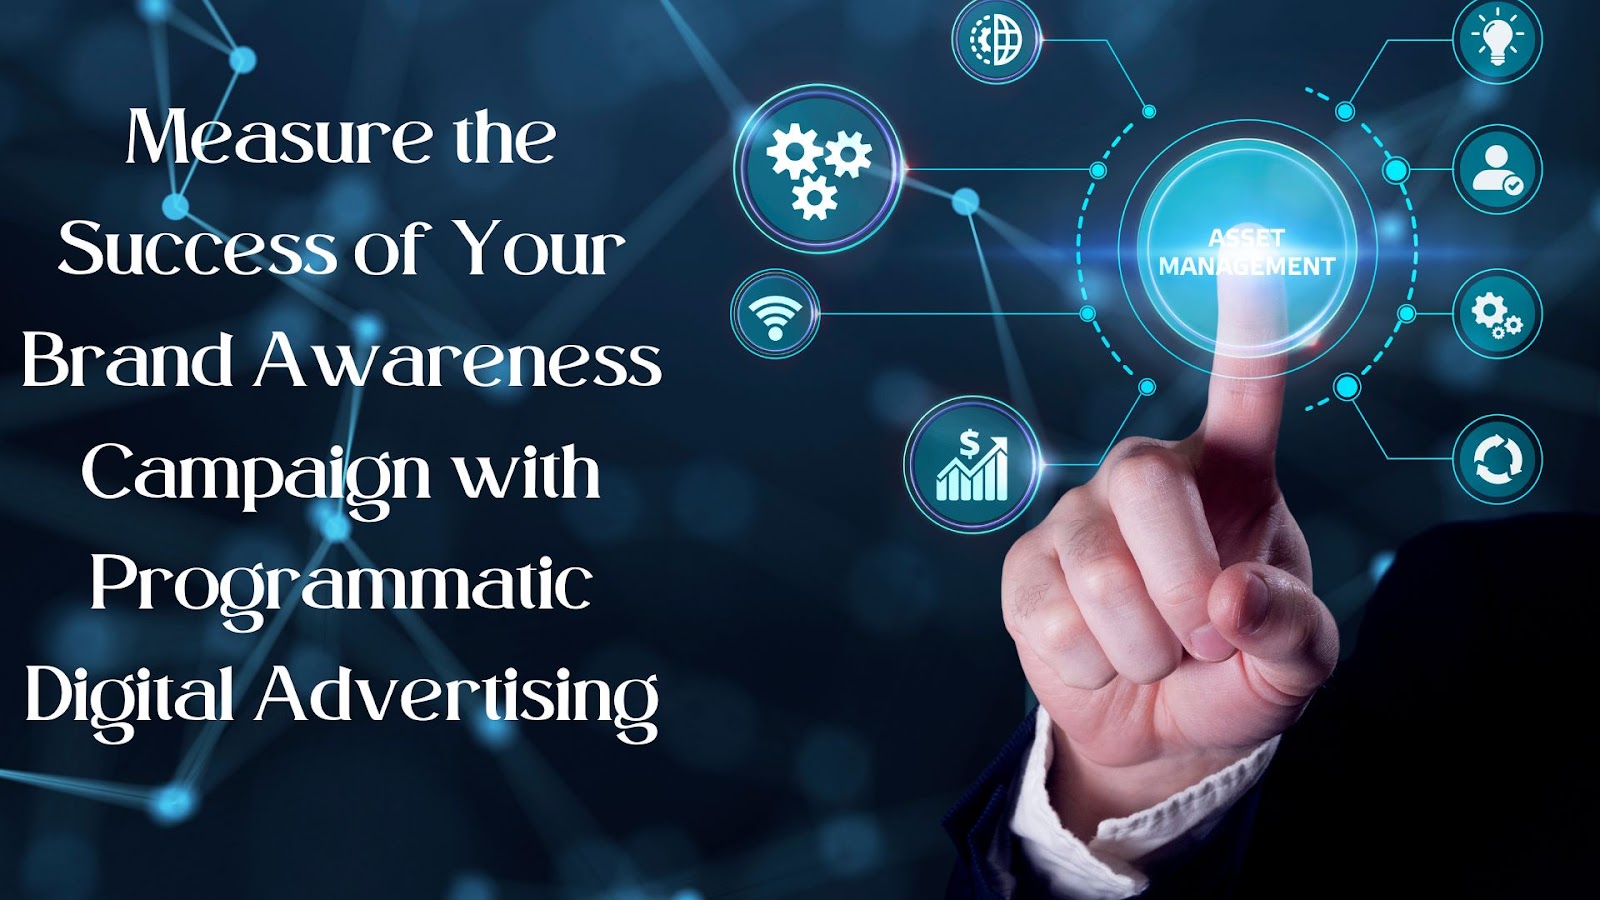 Measure the Success of Your Brand Awareness Campaign with Programmatic Digital Advertising
